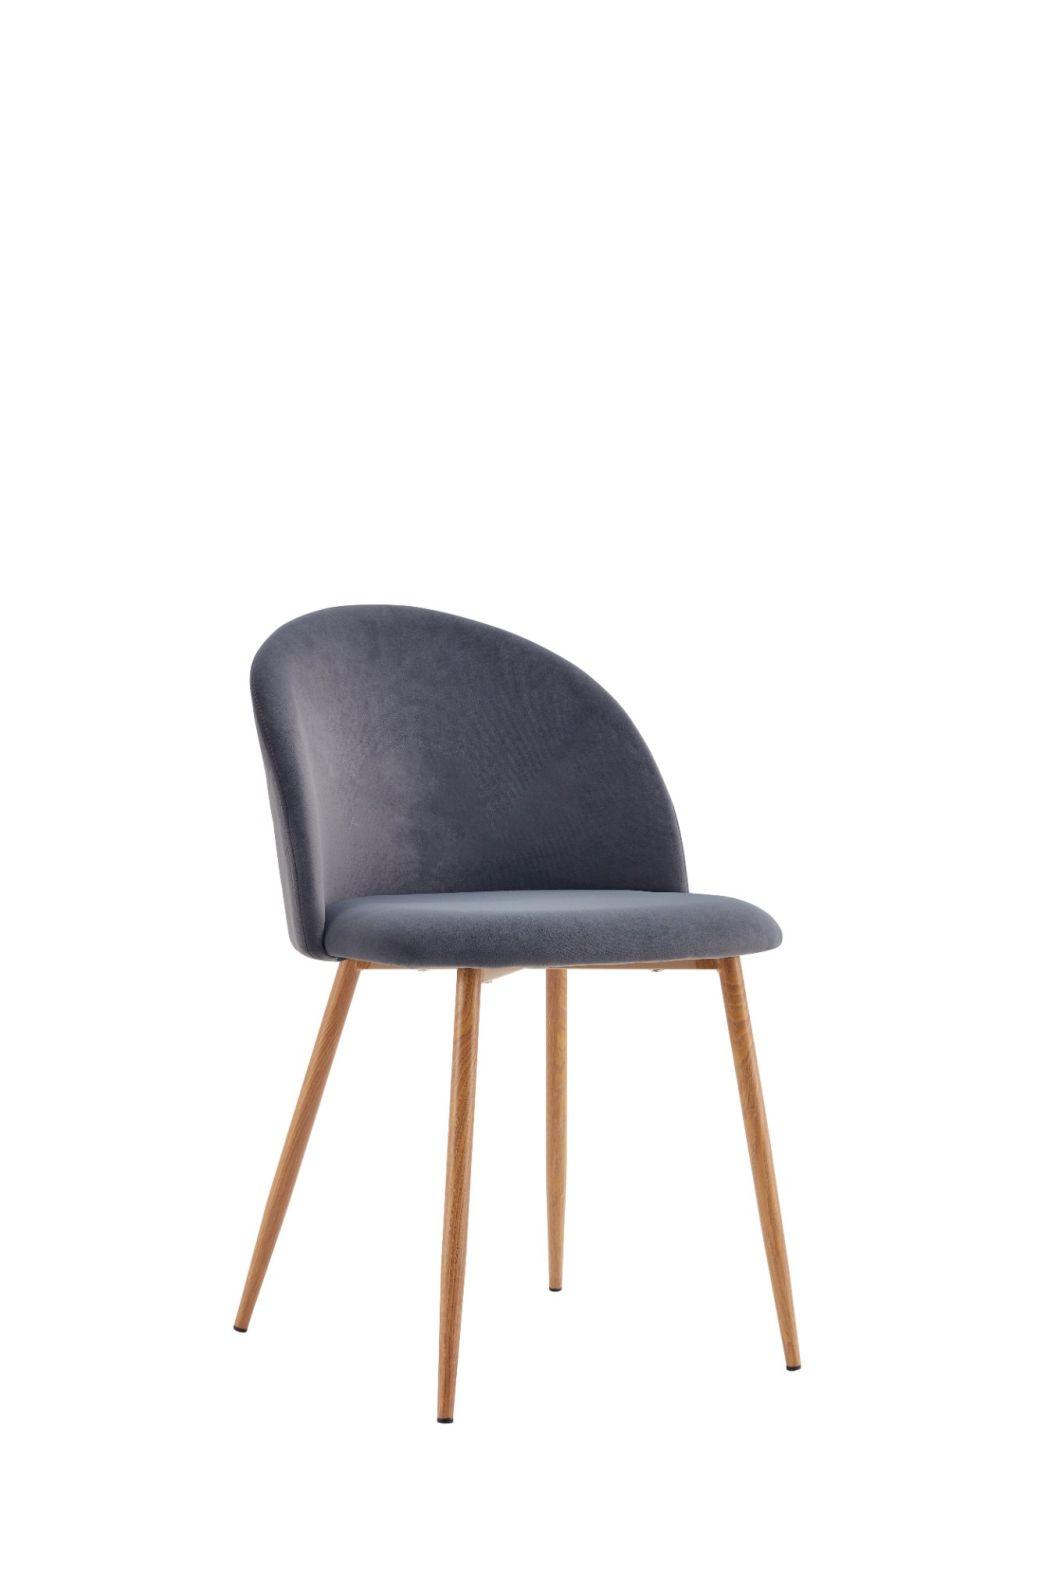 2021 Factory Supply Top One Best Selling Grey Velvet Fabric Dining Chair with Armrest and Wood Legs